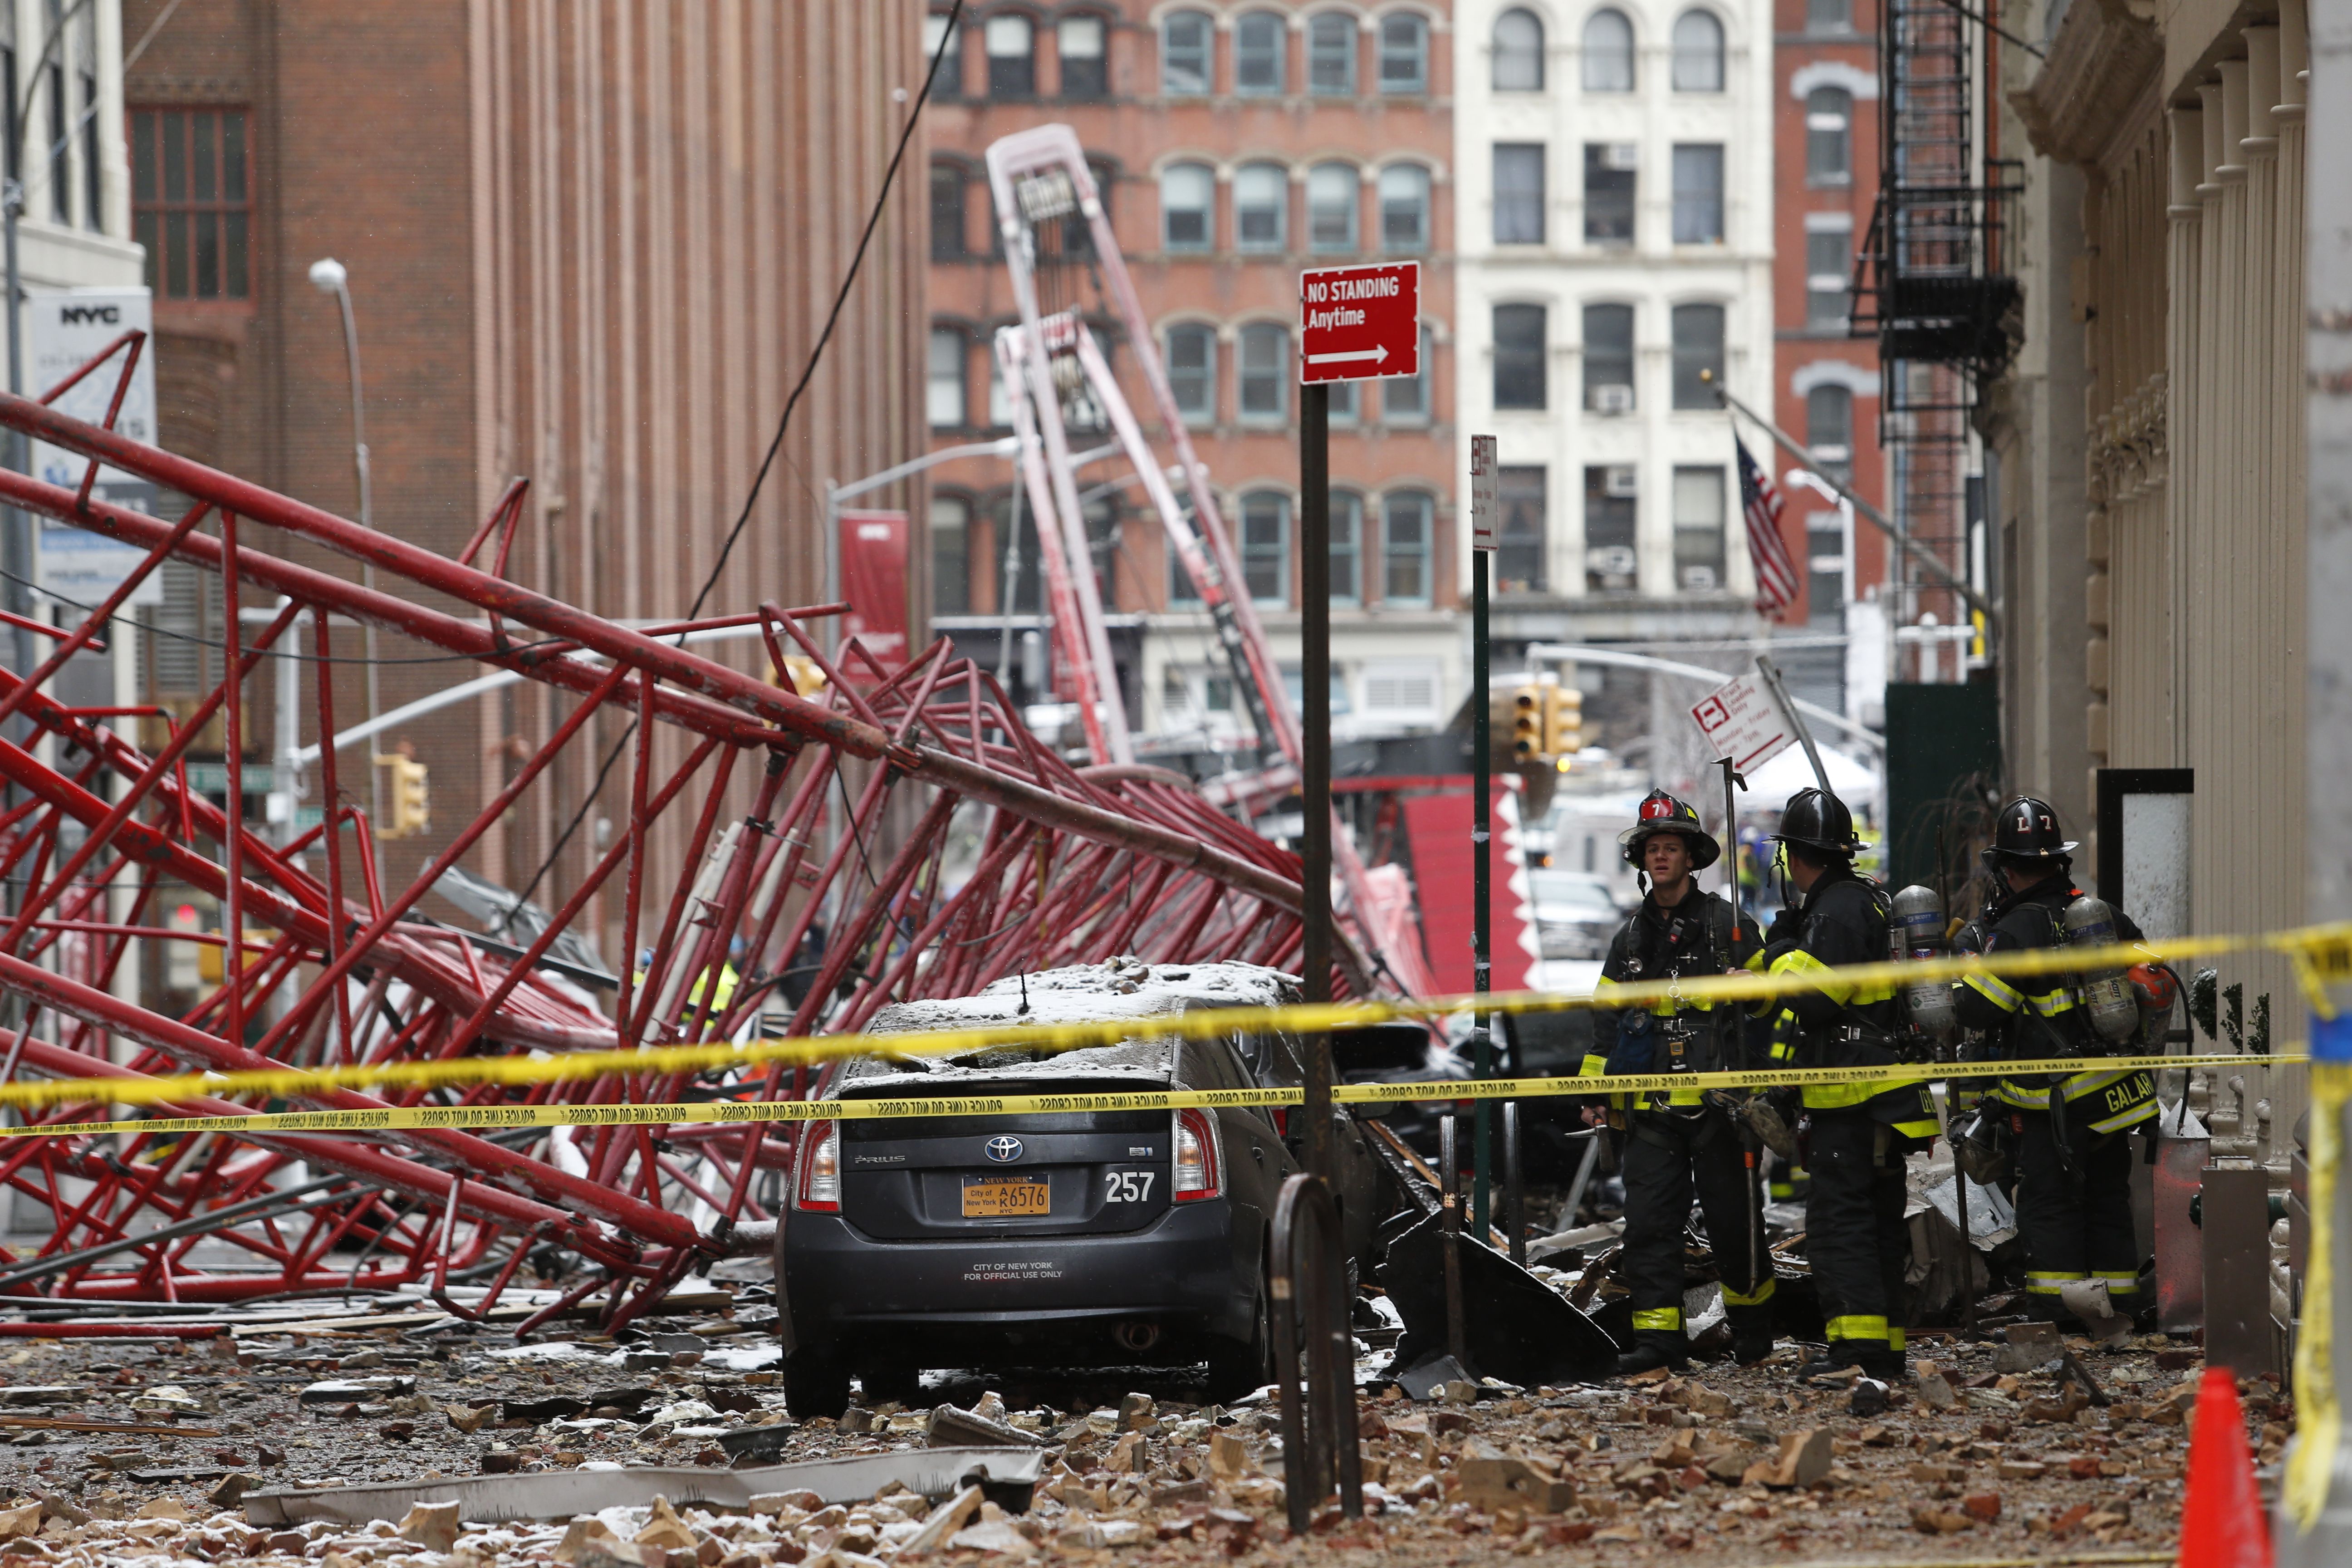 A general view of a massive construction crane that collapsed on a street in downtown Manhattan in New York on February 5, 2016. (KENA BETANCUR/AFP/Getty Images)